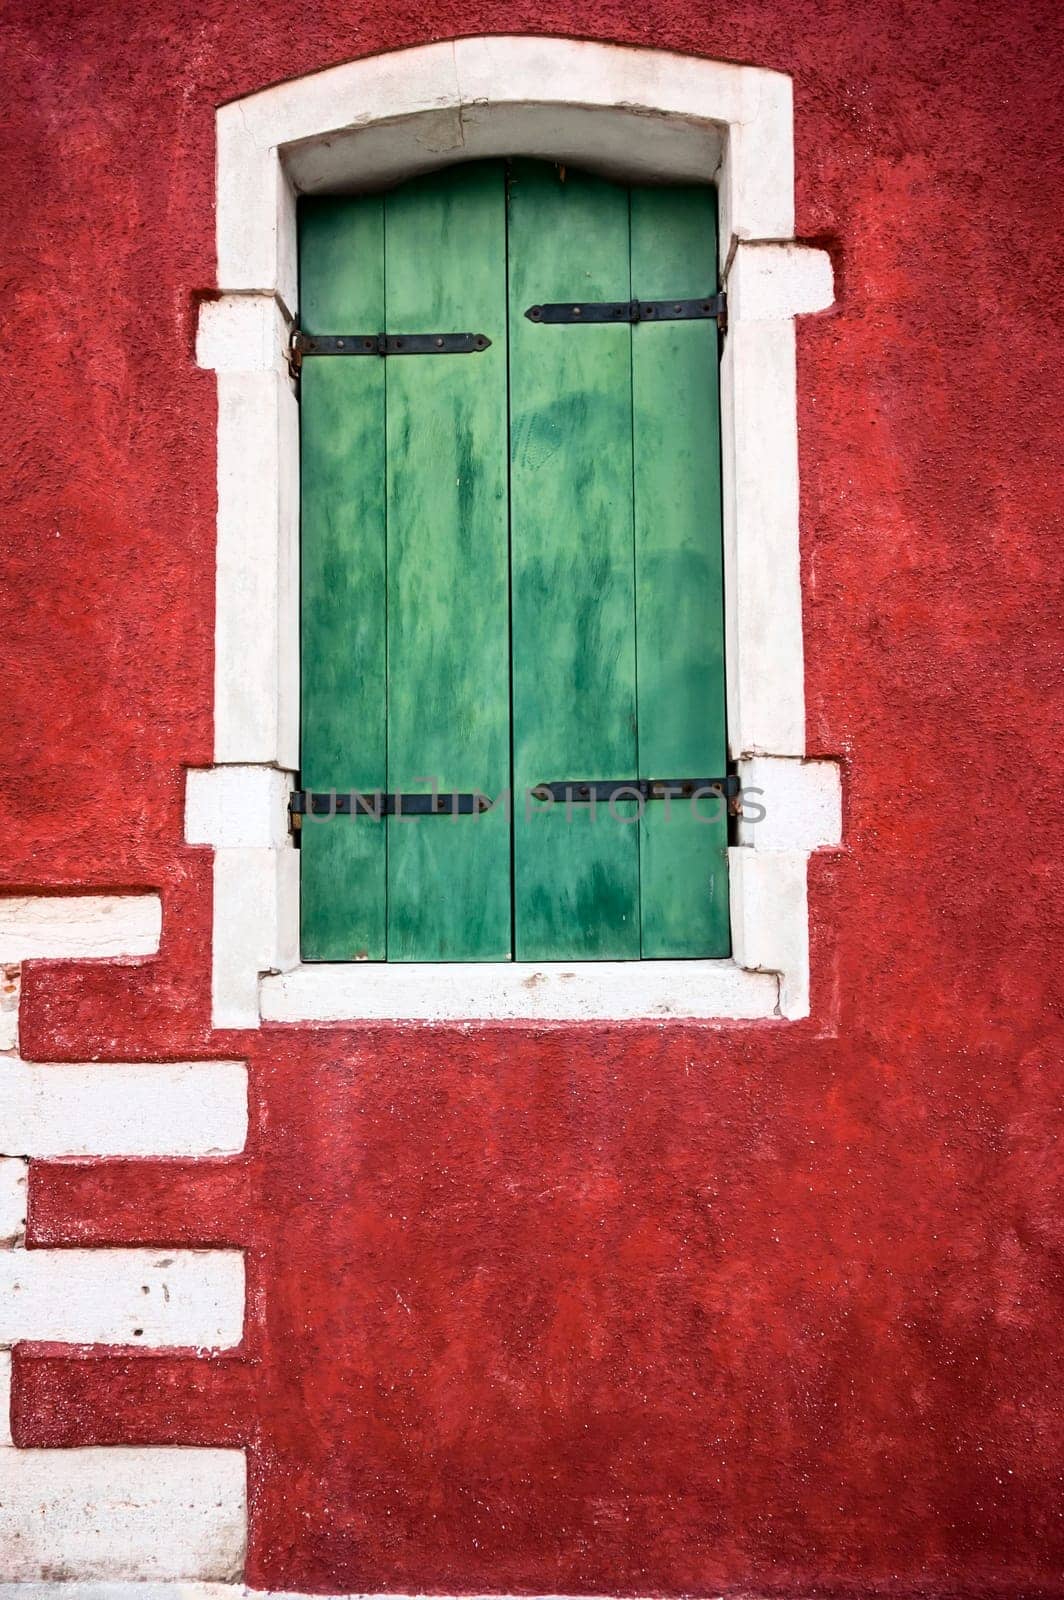 green window on red wall with white and black details